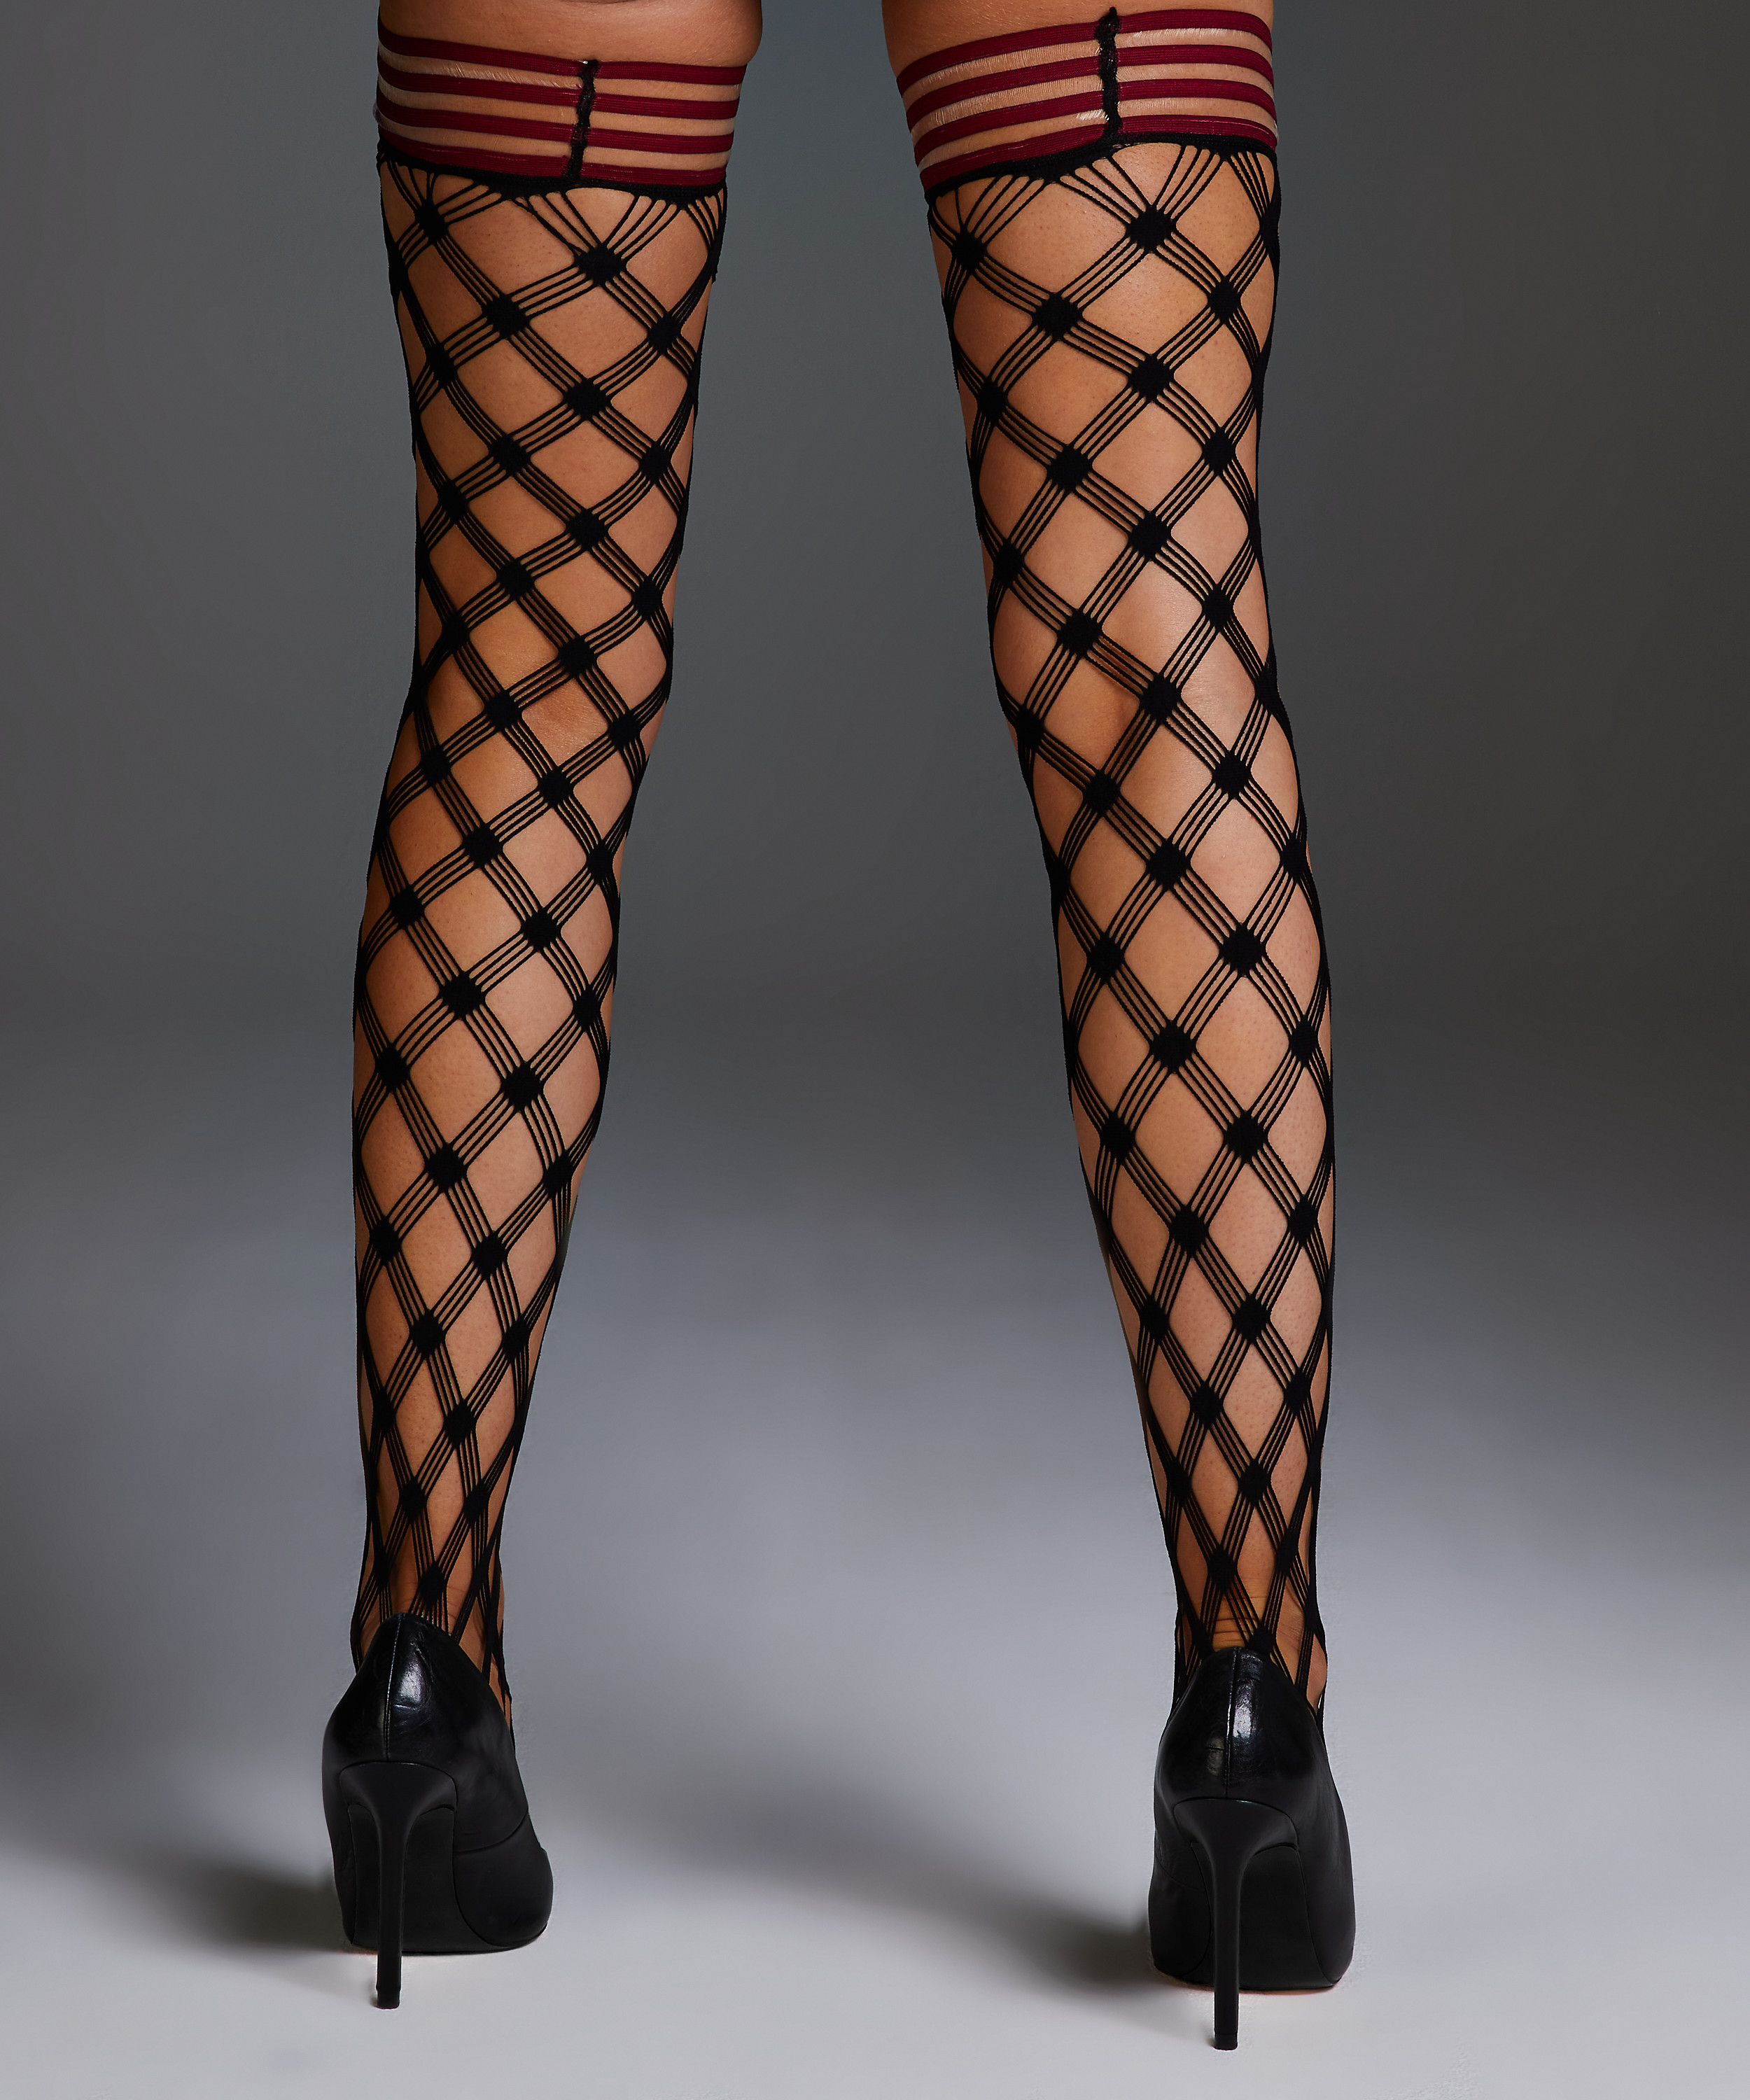 Stay-up Private Fishnet Crystal, Rood, main